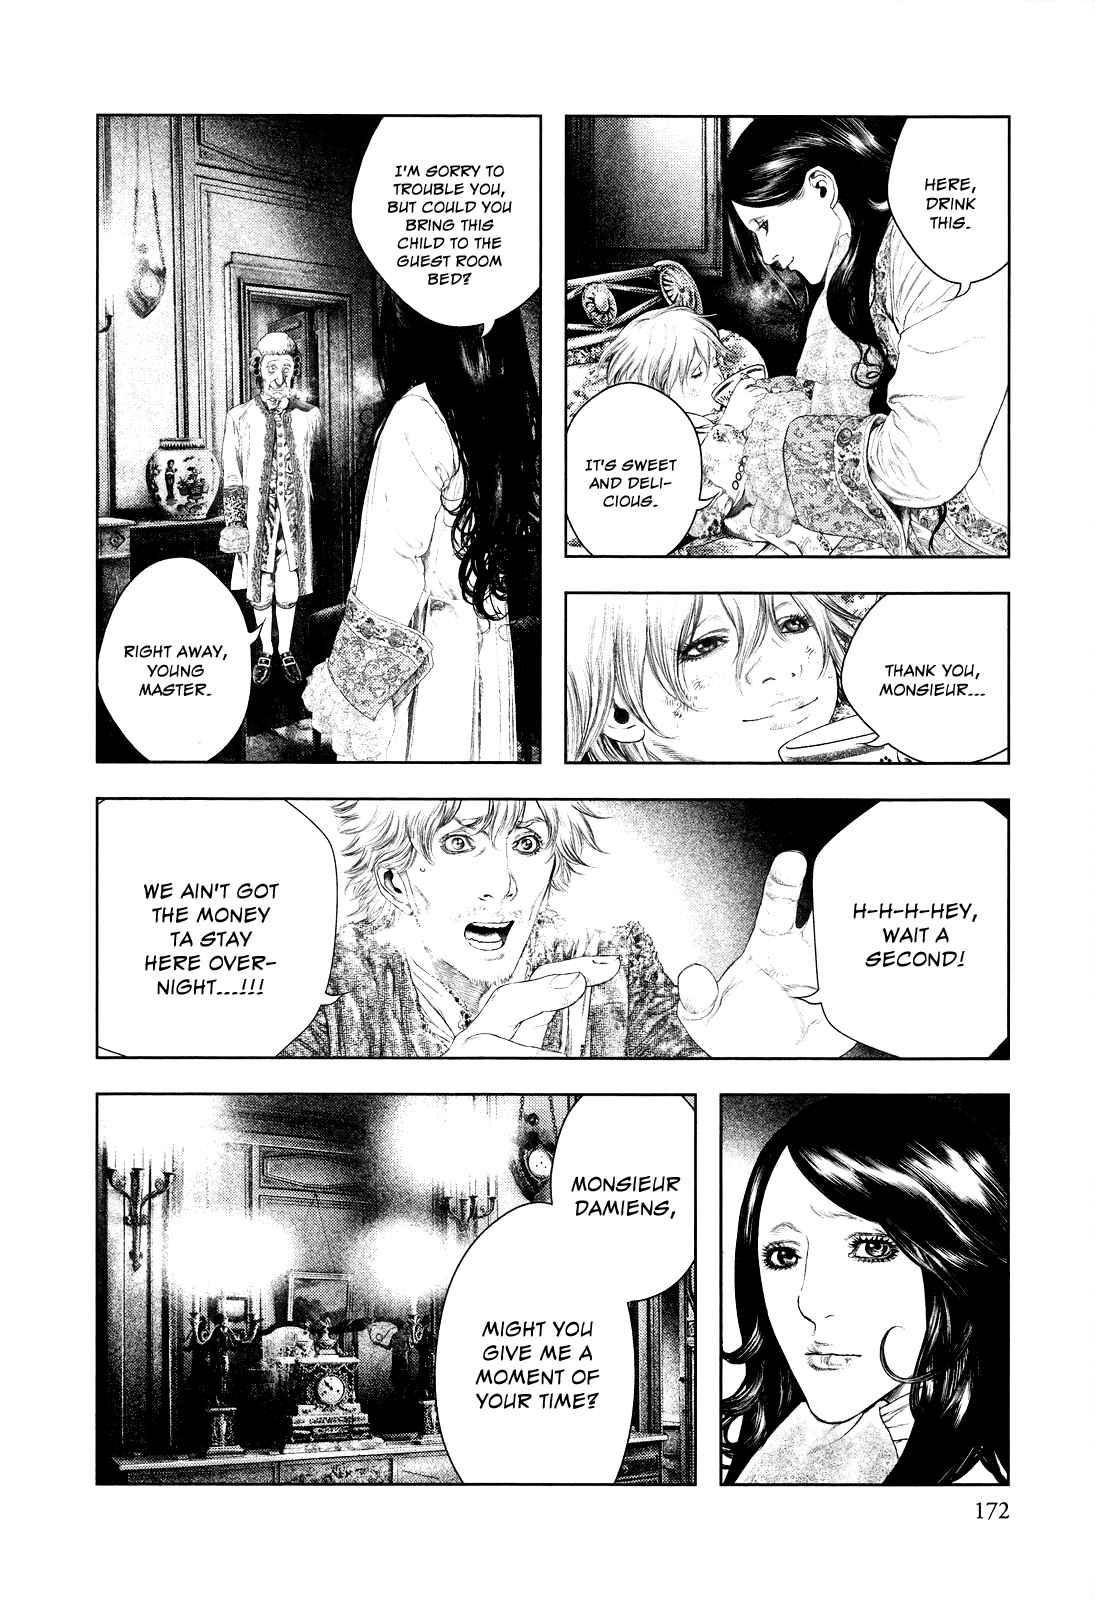 Innocent Vol. 2 Ch. 18 The "Have Not's" Lamentation